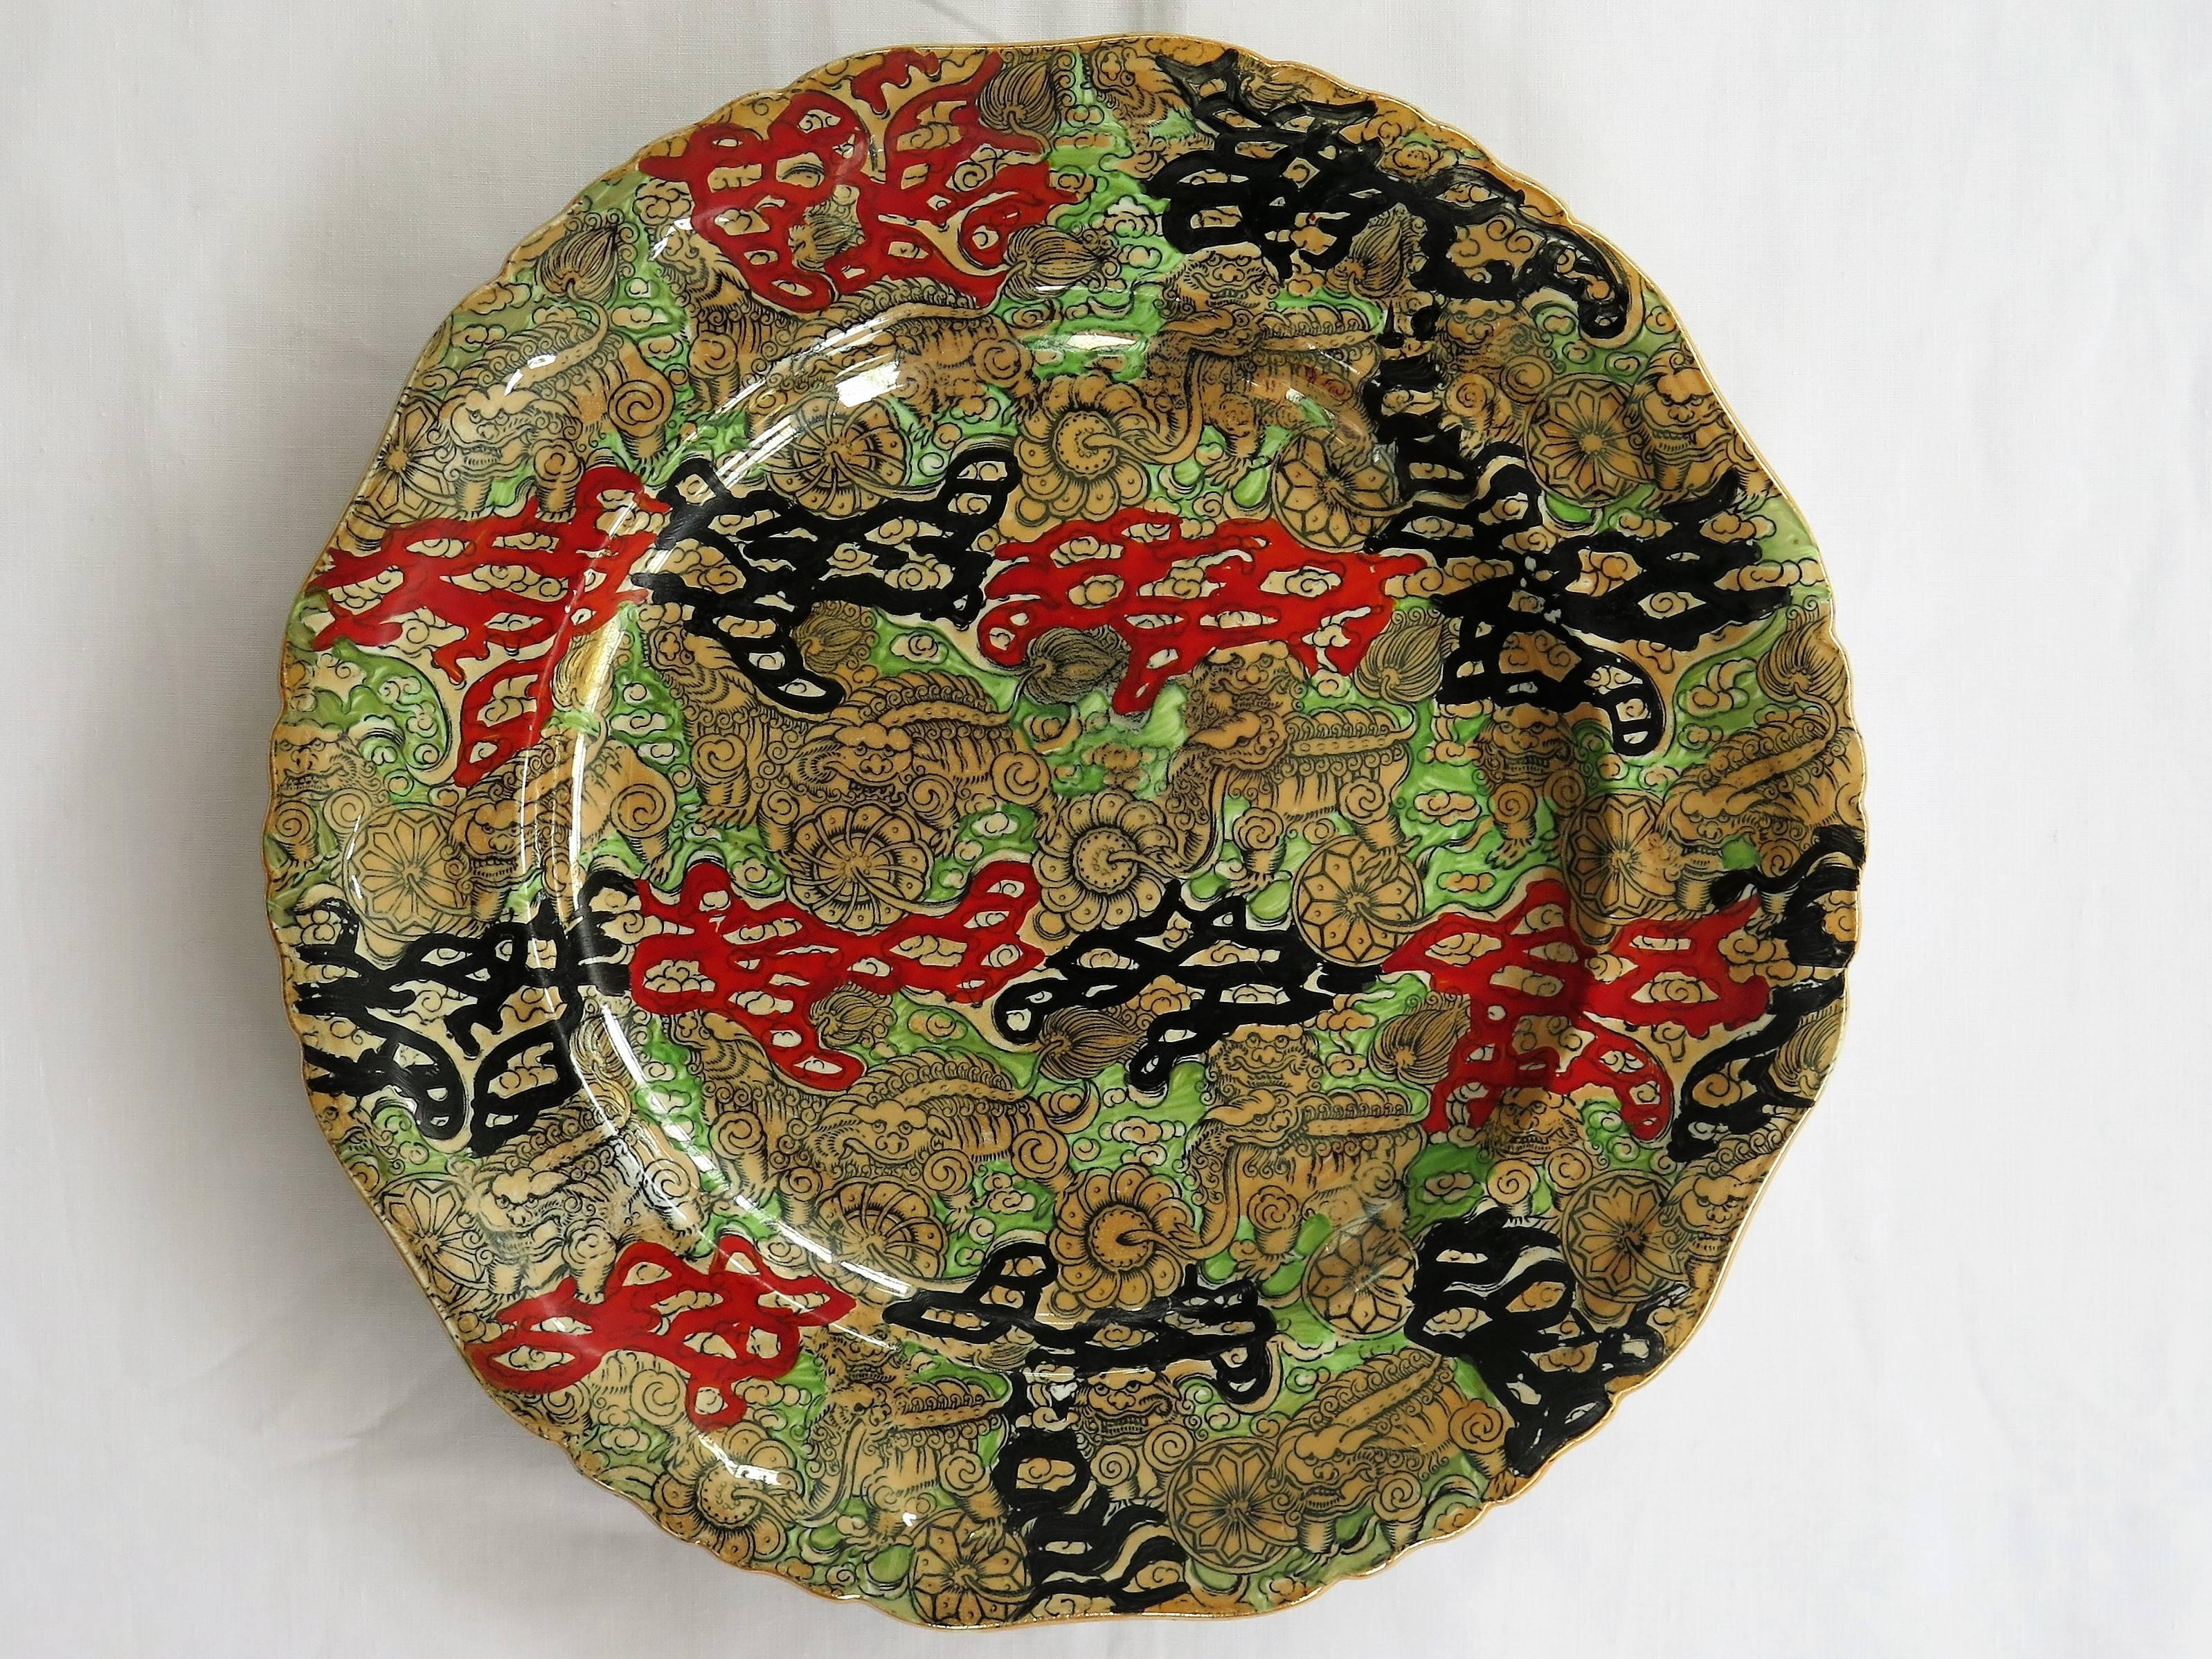 This is a very good, large dinner plate by Mason's ironstone, England in the Bandana pattern, dating to circa 1870. 

The Plate is circular in shape with a wavy moulded edge.

This plate has one of the sought after chinoiserie patterns called